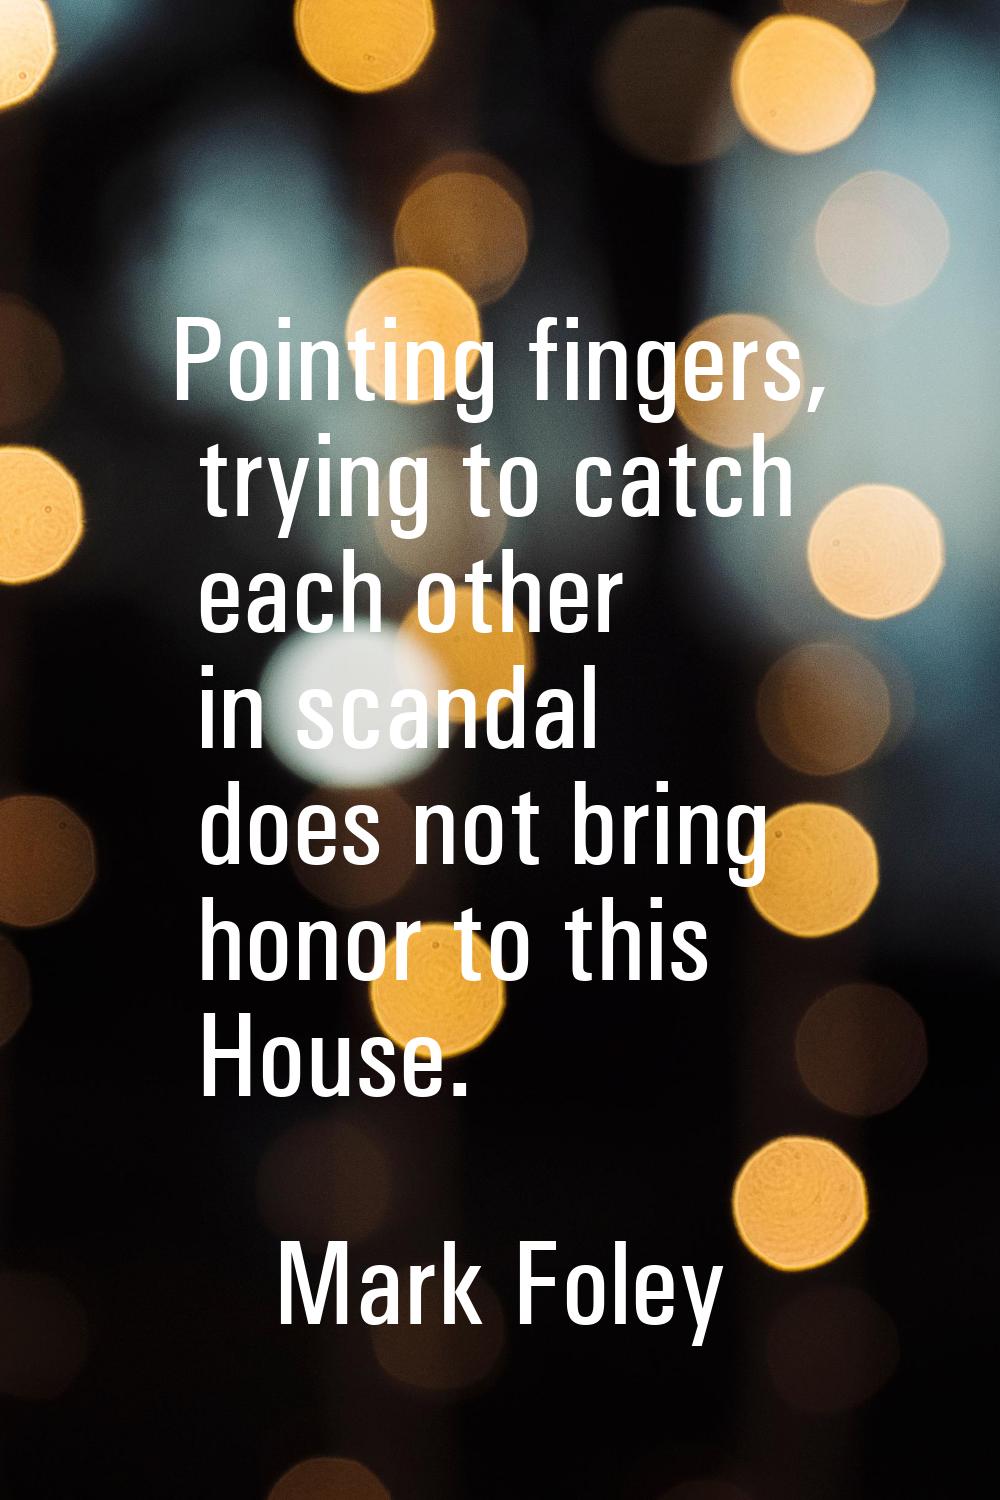 Pointing fingers, trying to catch each other in scandal does not bring honor to this House.